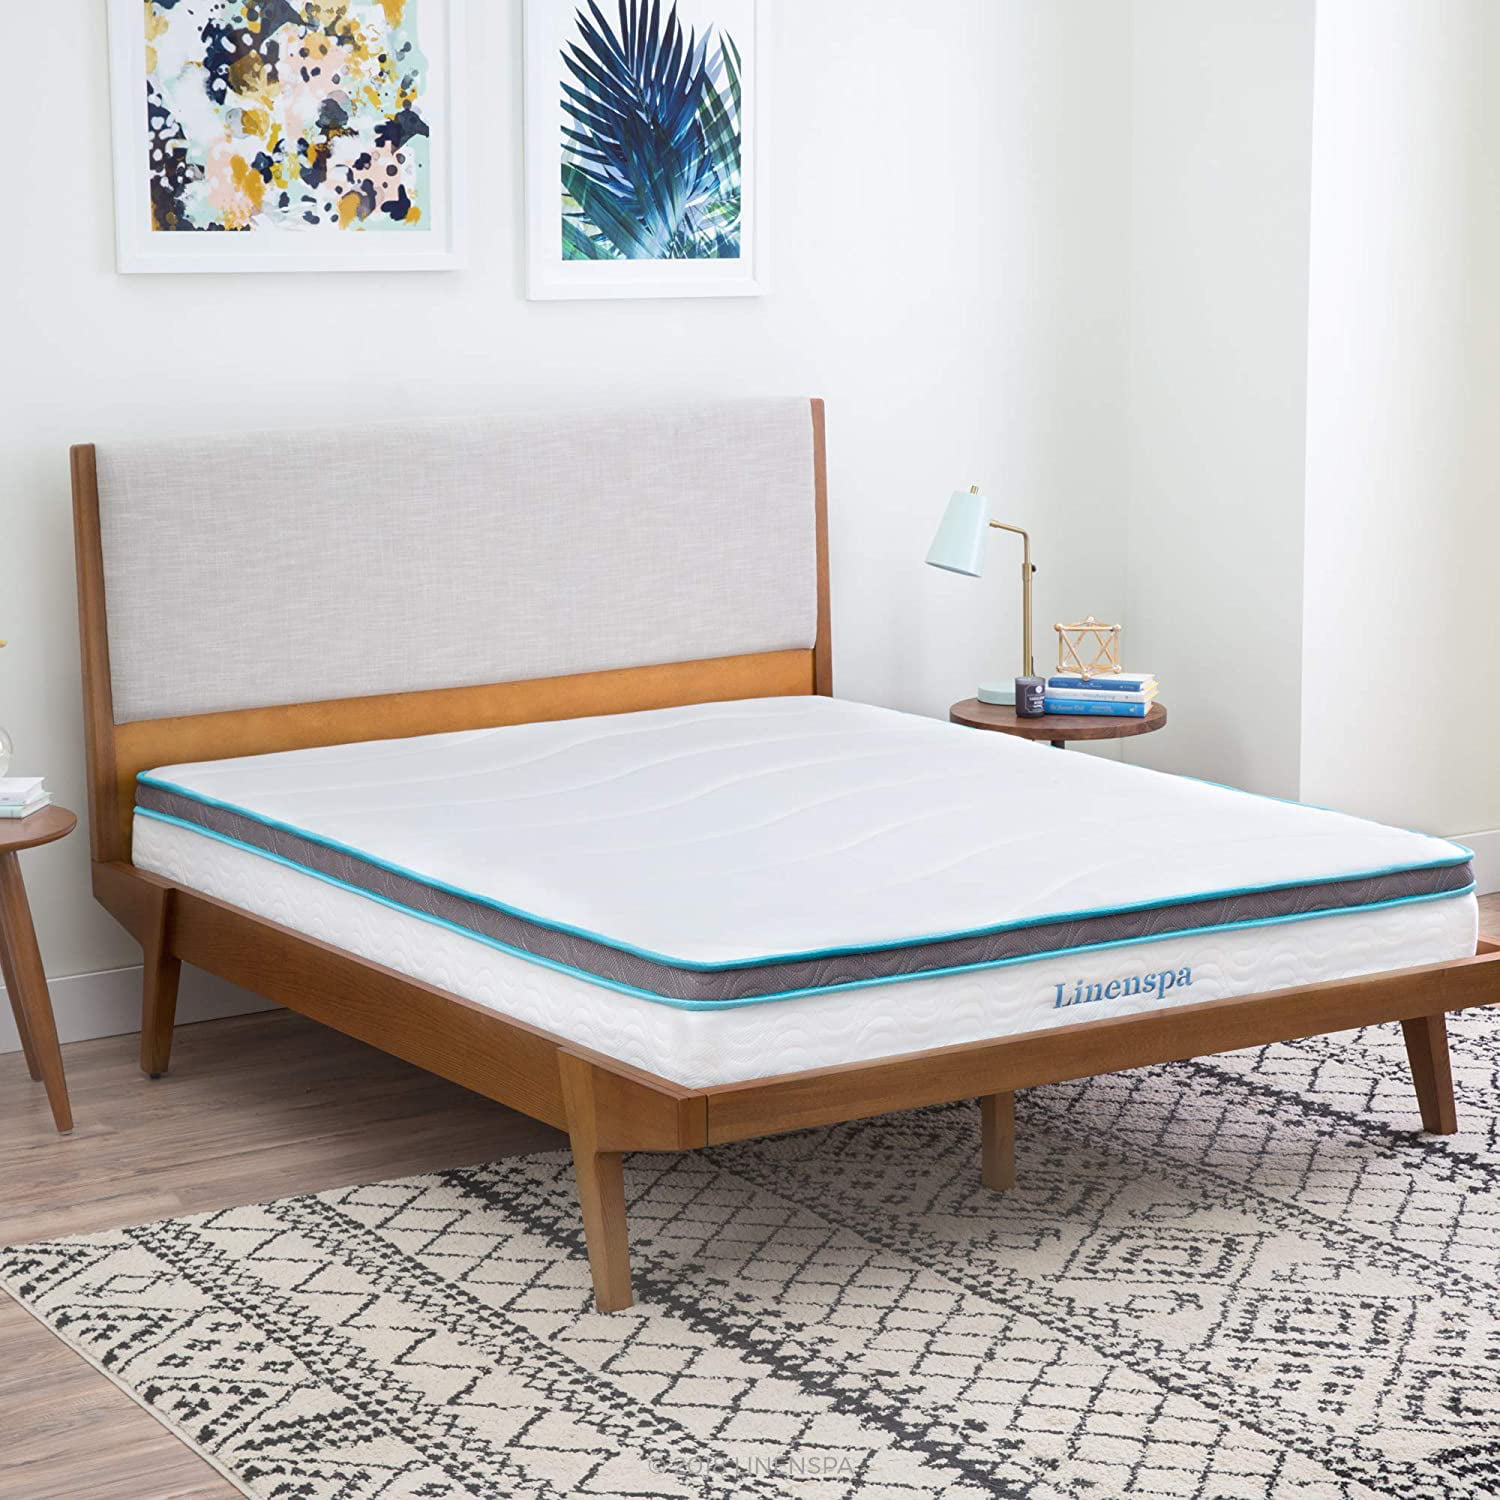 Linenspa 8 Inch Memory Foam And, Linenspa Bed Frame